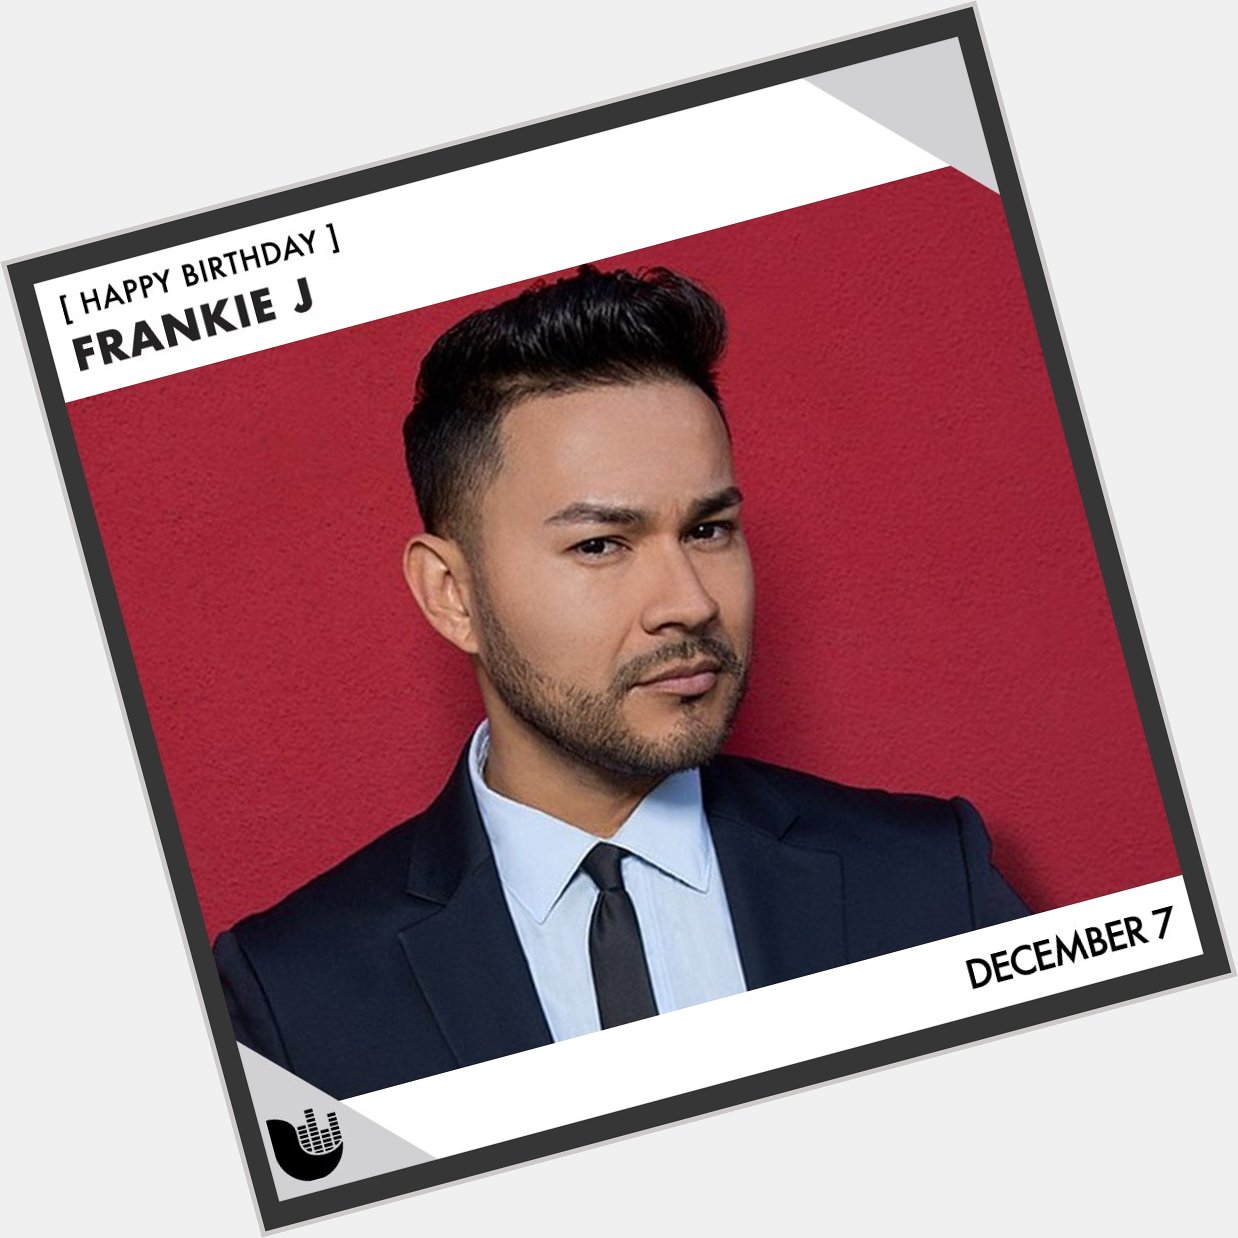 Join us in wishing a happy birthday to Frankie J! 